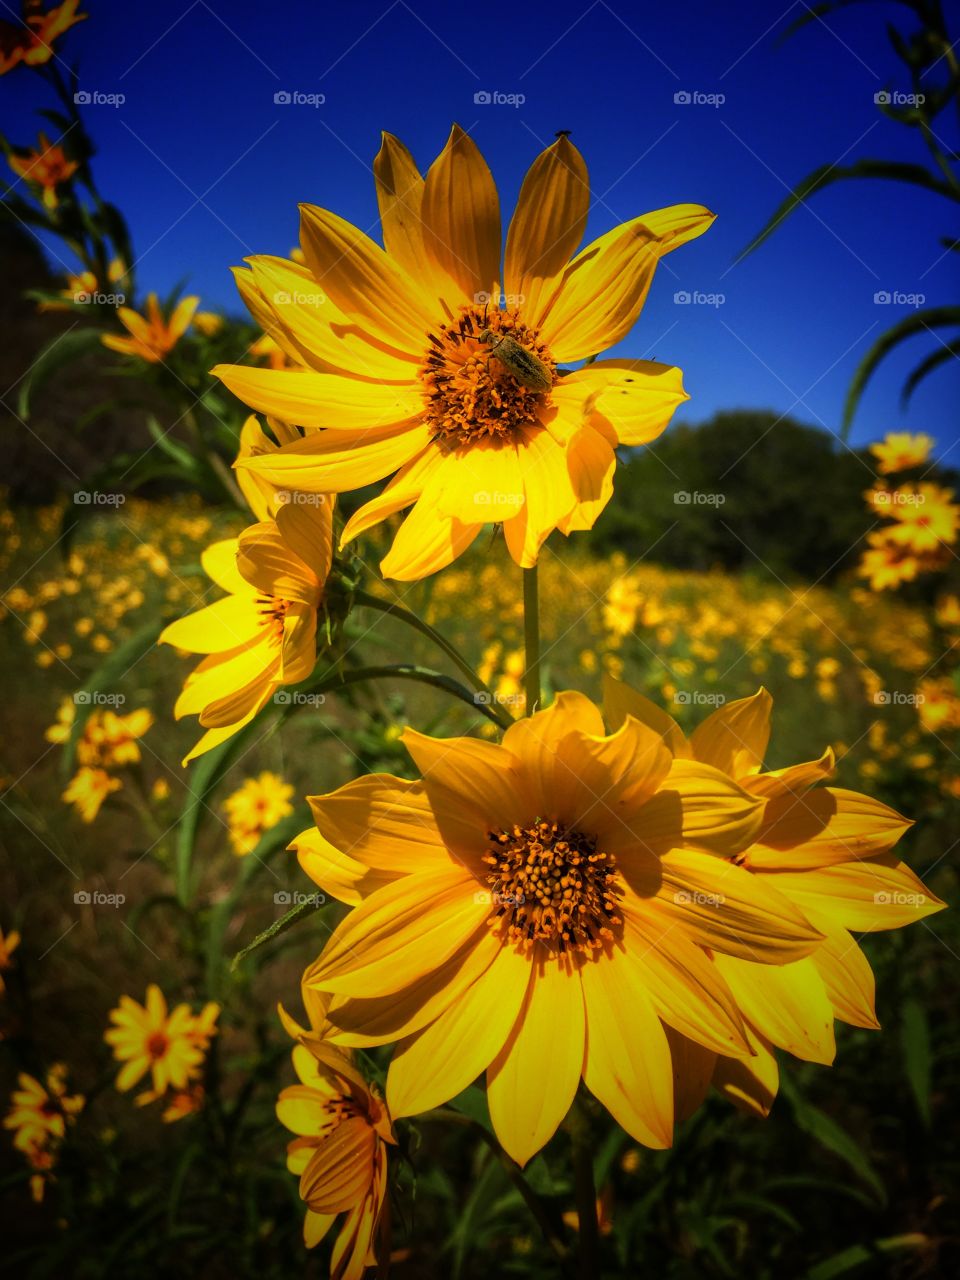 Texas Hill Country wild flowers - go biking on the many trails in the summer and you will see these 